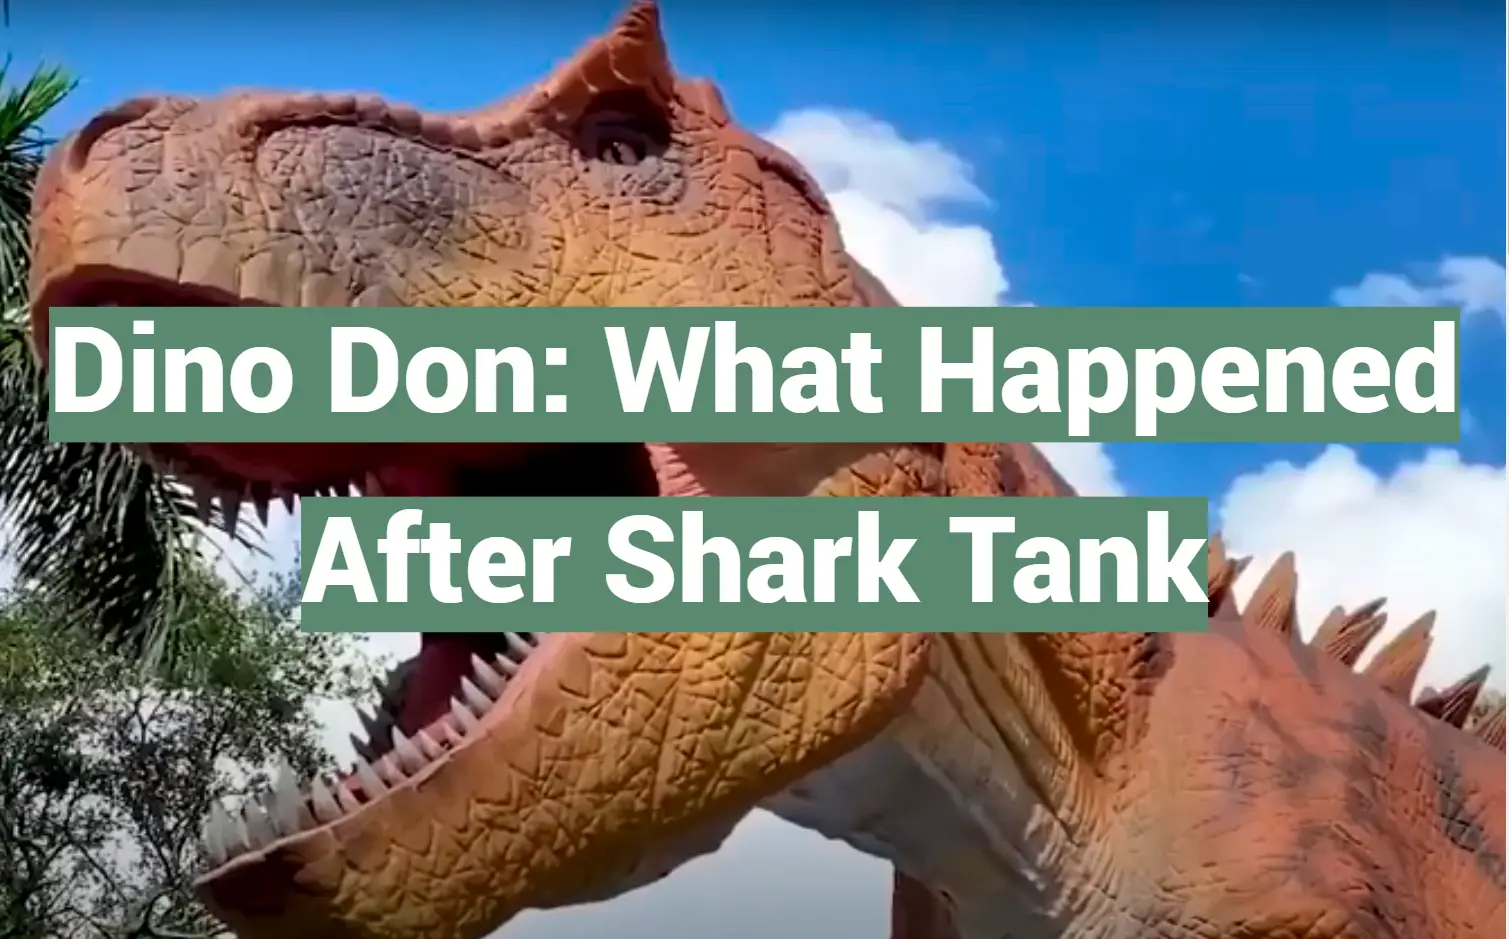 Dino Don: What Happened After Shark Tank